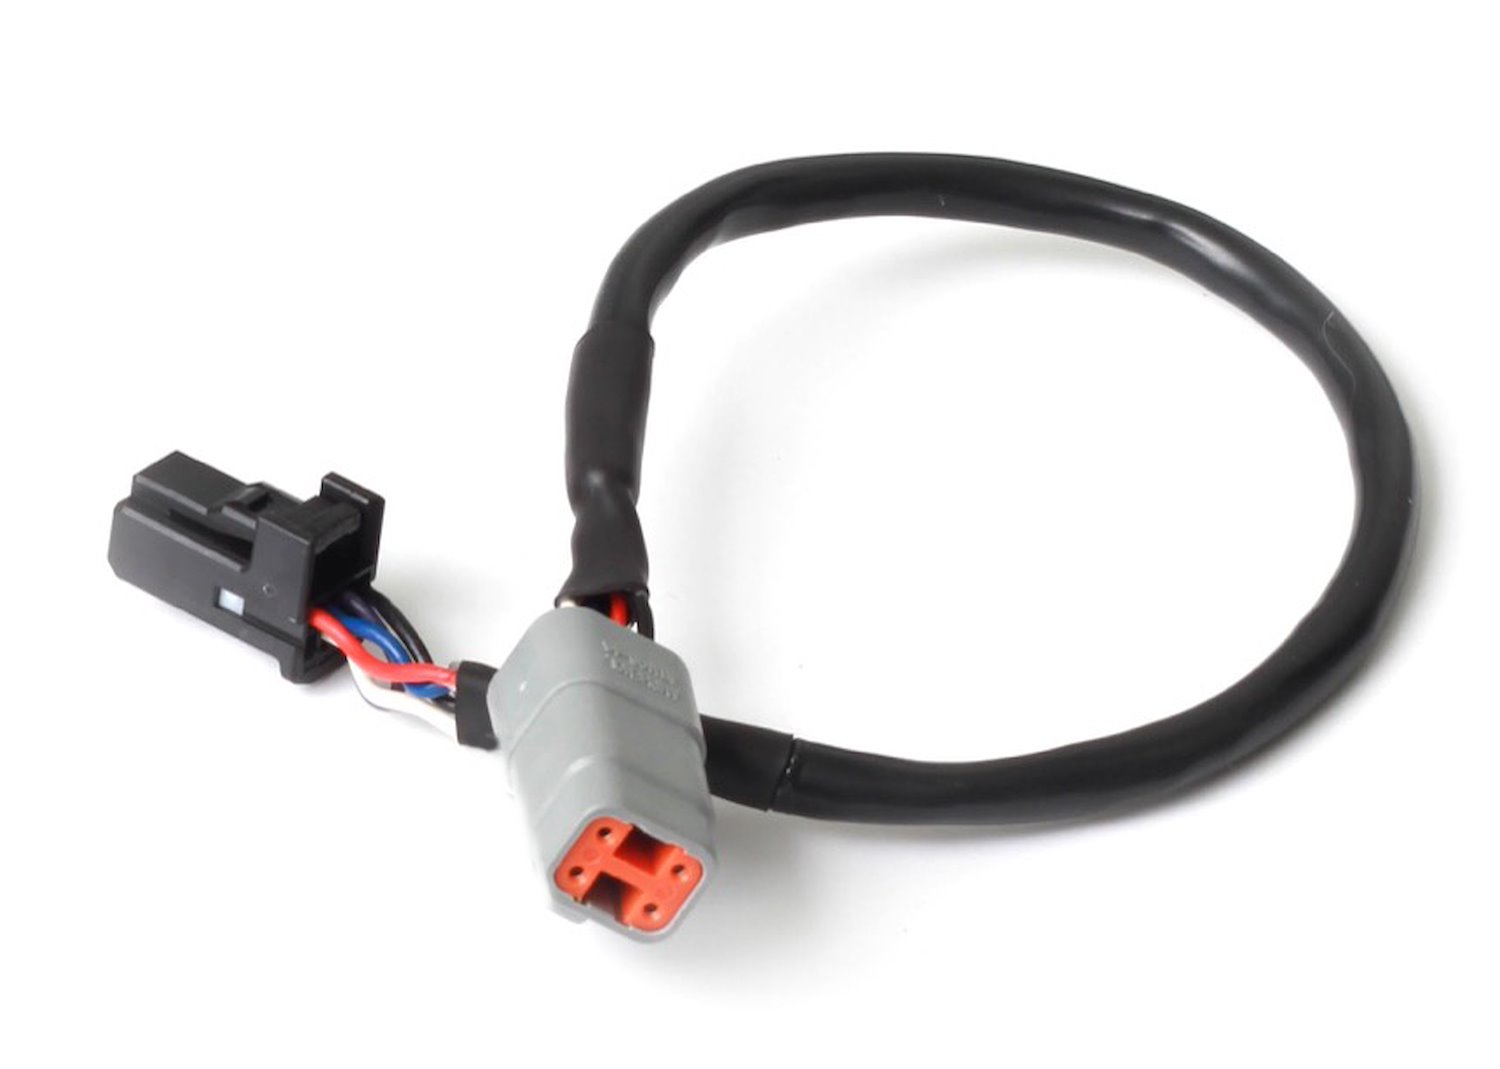 HT-130029 Elite CAN Cable, DTM-4 to DTM-4, 3600 mm (144 in.)